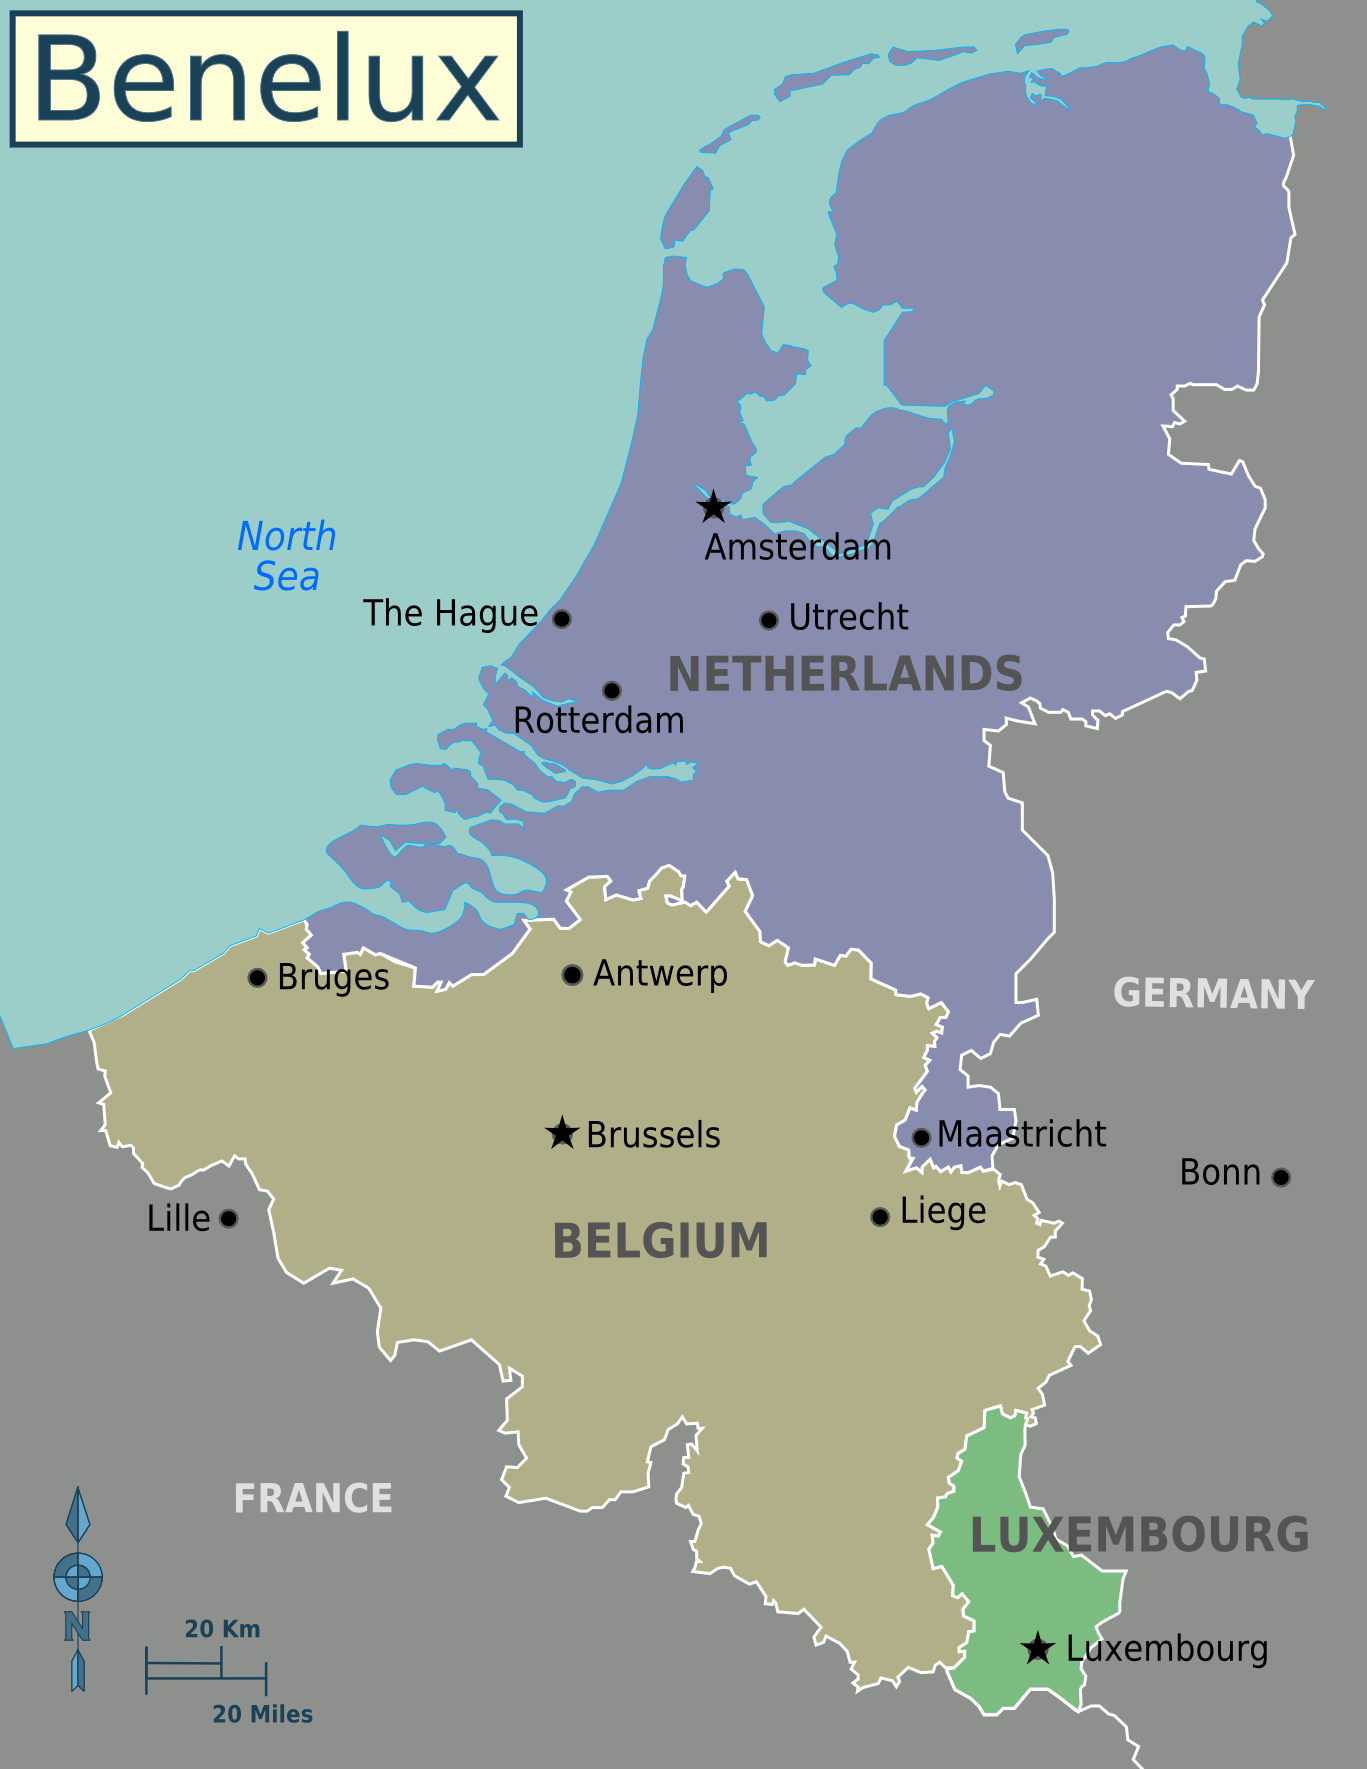 Benelux countries